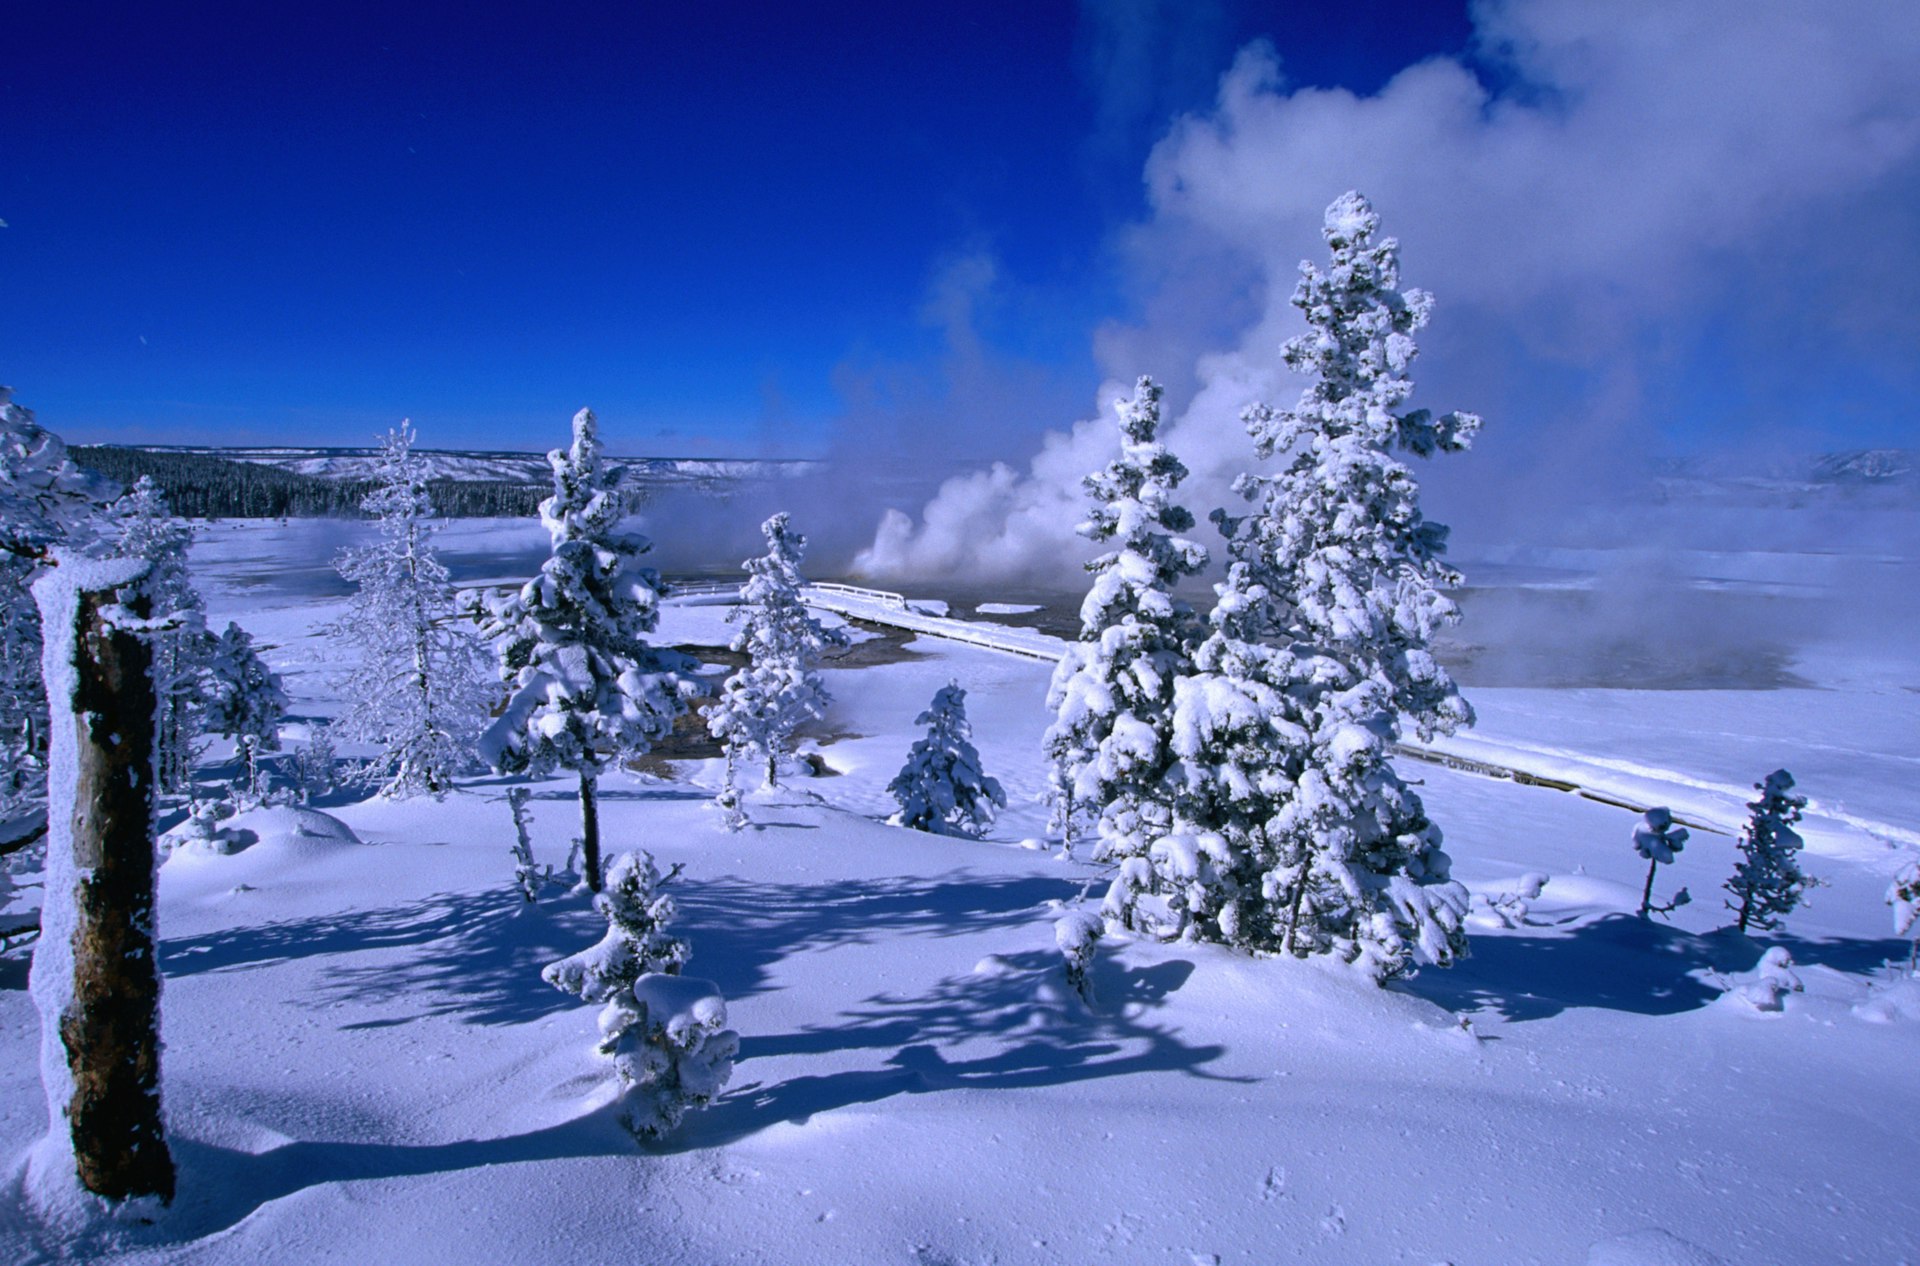 A large plume of smoke from the Fountain Paint Pots hovers about a few snow-covered trees at Yellowstone National Park 